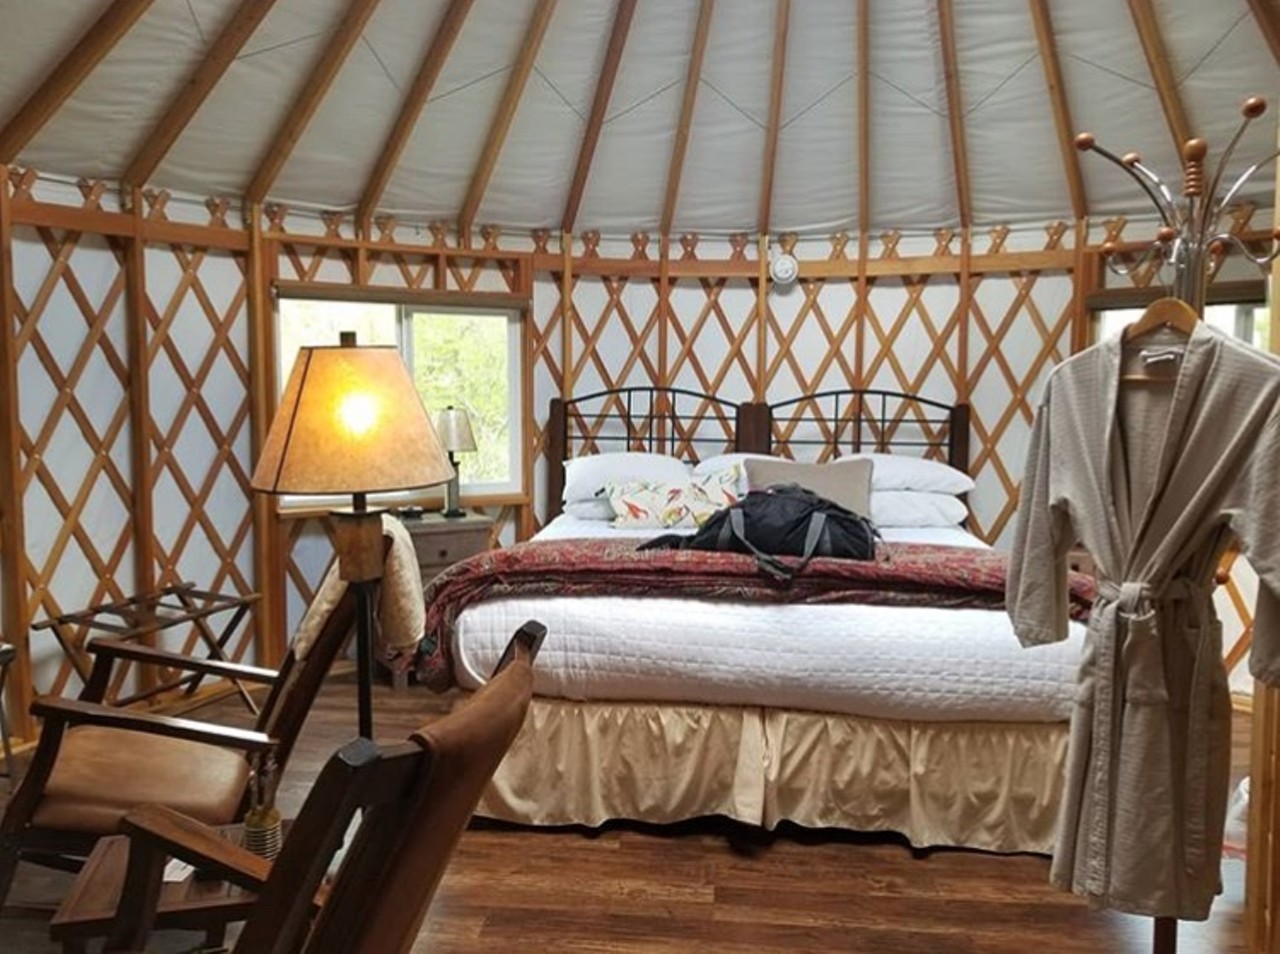 Inn and Spa at Cedar Falls
21190 OH-374, Logan
There are so many lodging options at Cedar Falls to satisfy your needs of a serene escape. Stay overnight in a pacific style yurt or a cozy cottage. No matter what, expect quite the glamping experience.  
Photo via Youngblood16c/Instagram